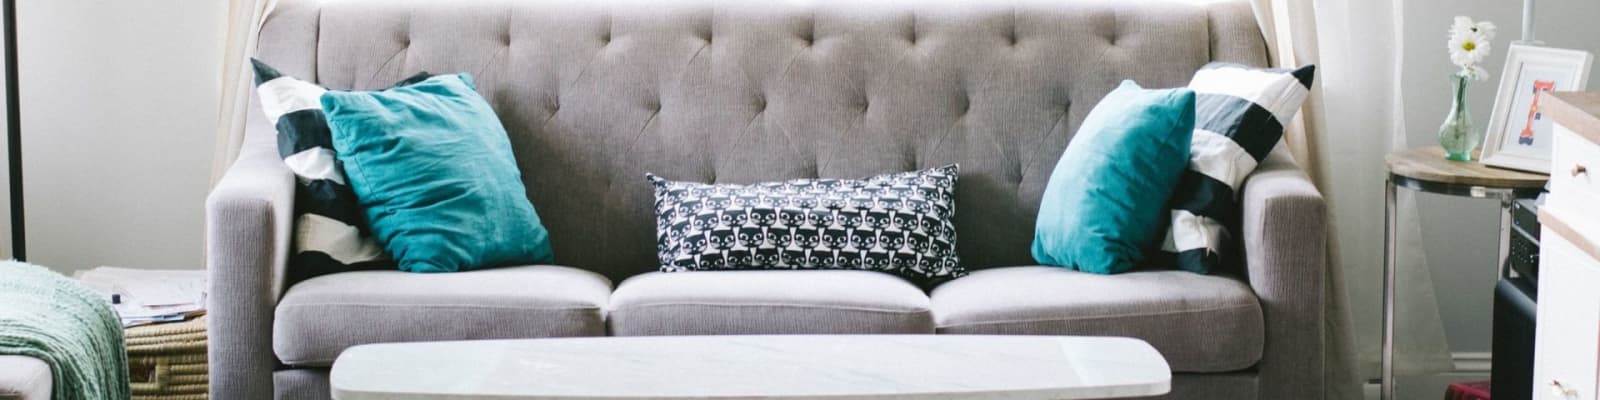 upholstery cleaning pros in Johannesburg